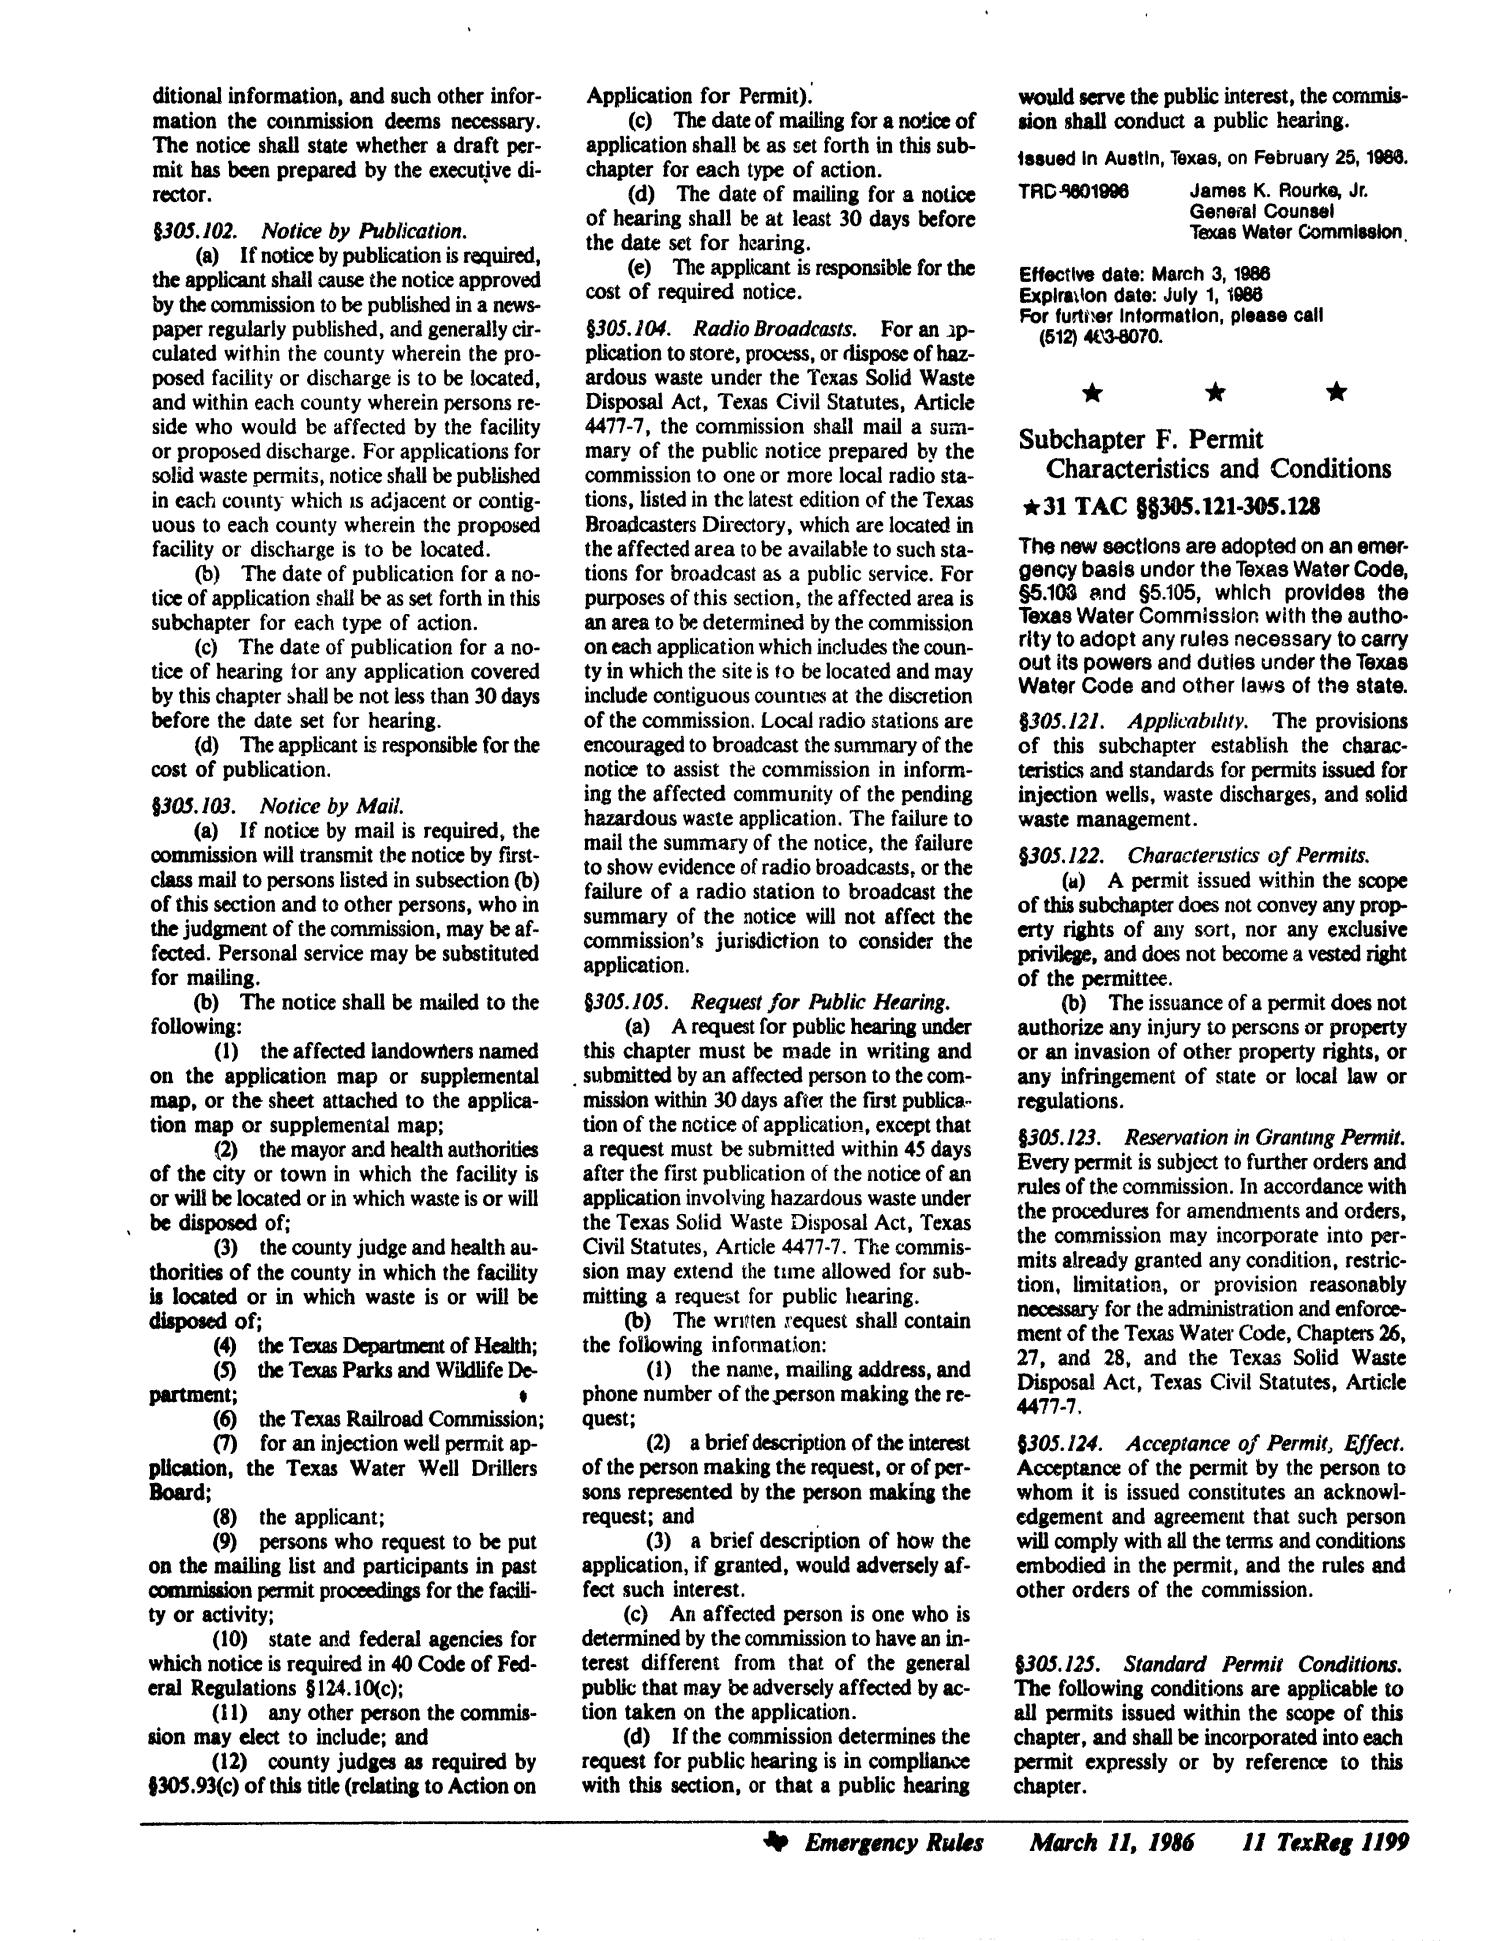 Texas Register, Volume 11, Number 19, Pages 1163-1244, March 11, 1986
                                                
                                                    1199
                                                